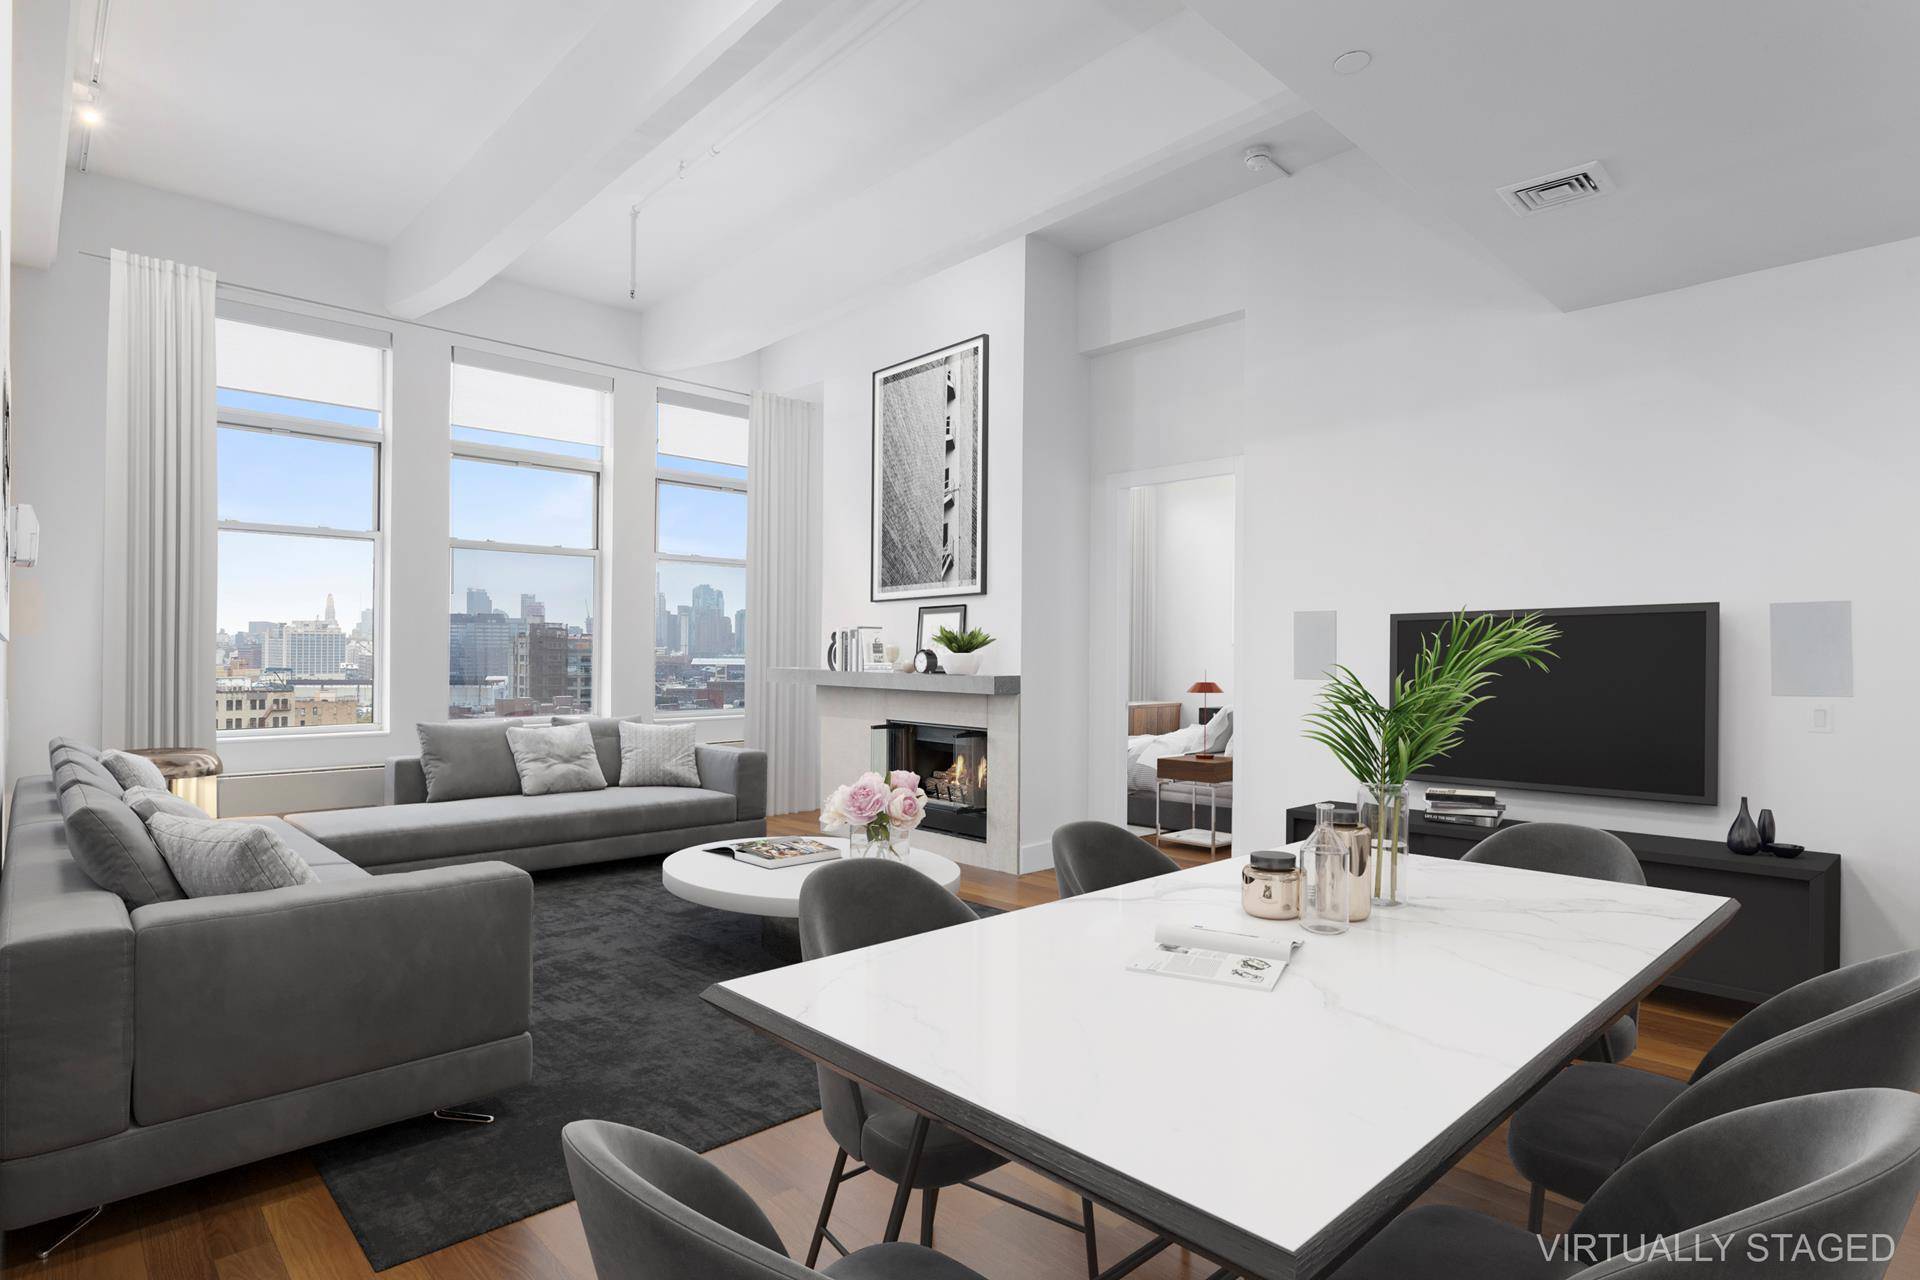 Expansive two bedroom duplex loft with private terrace at The Gretsch in Williamsburg.